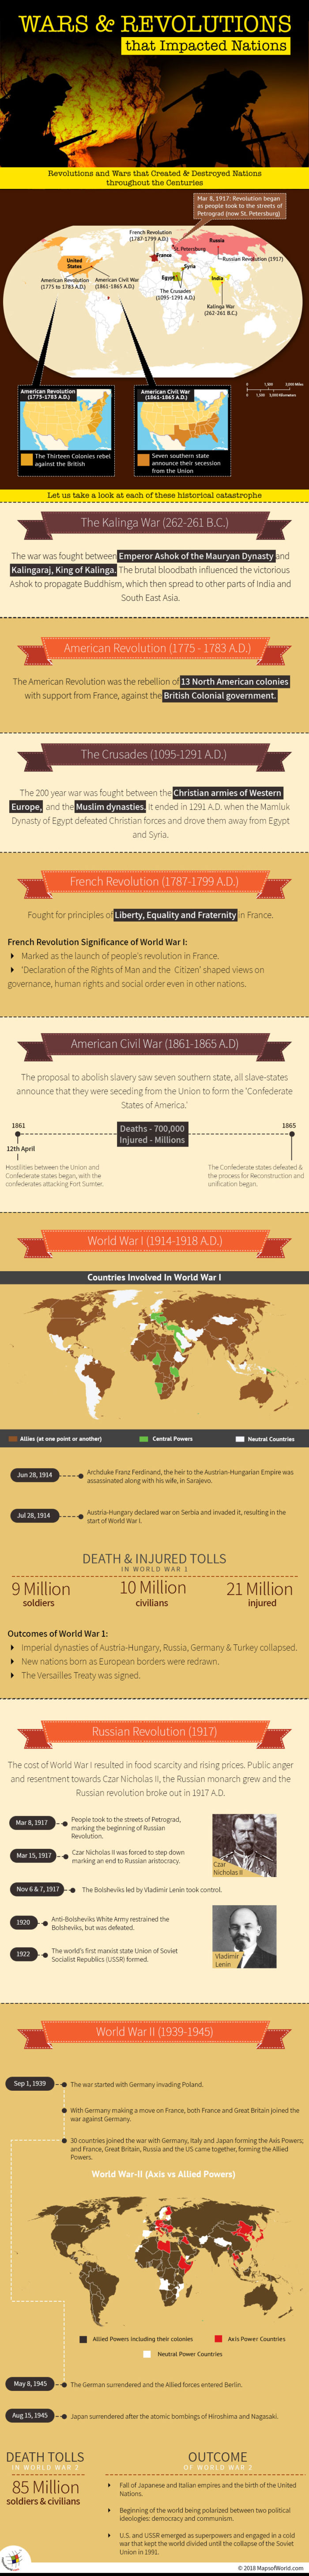 Infographic describing significant Wars and Revolutions of history